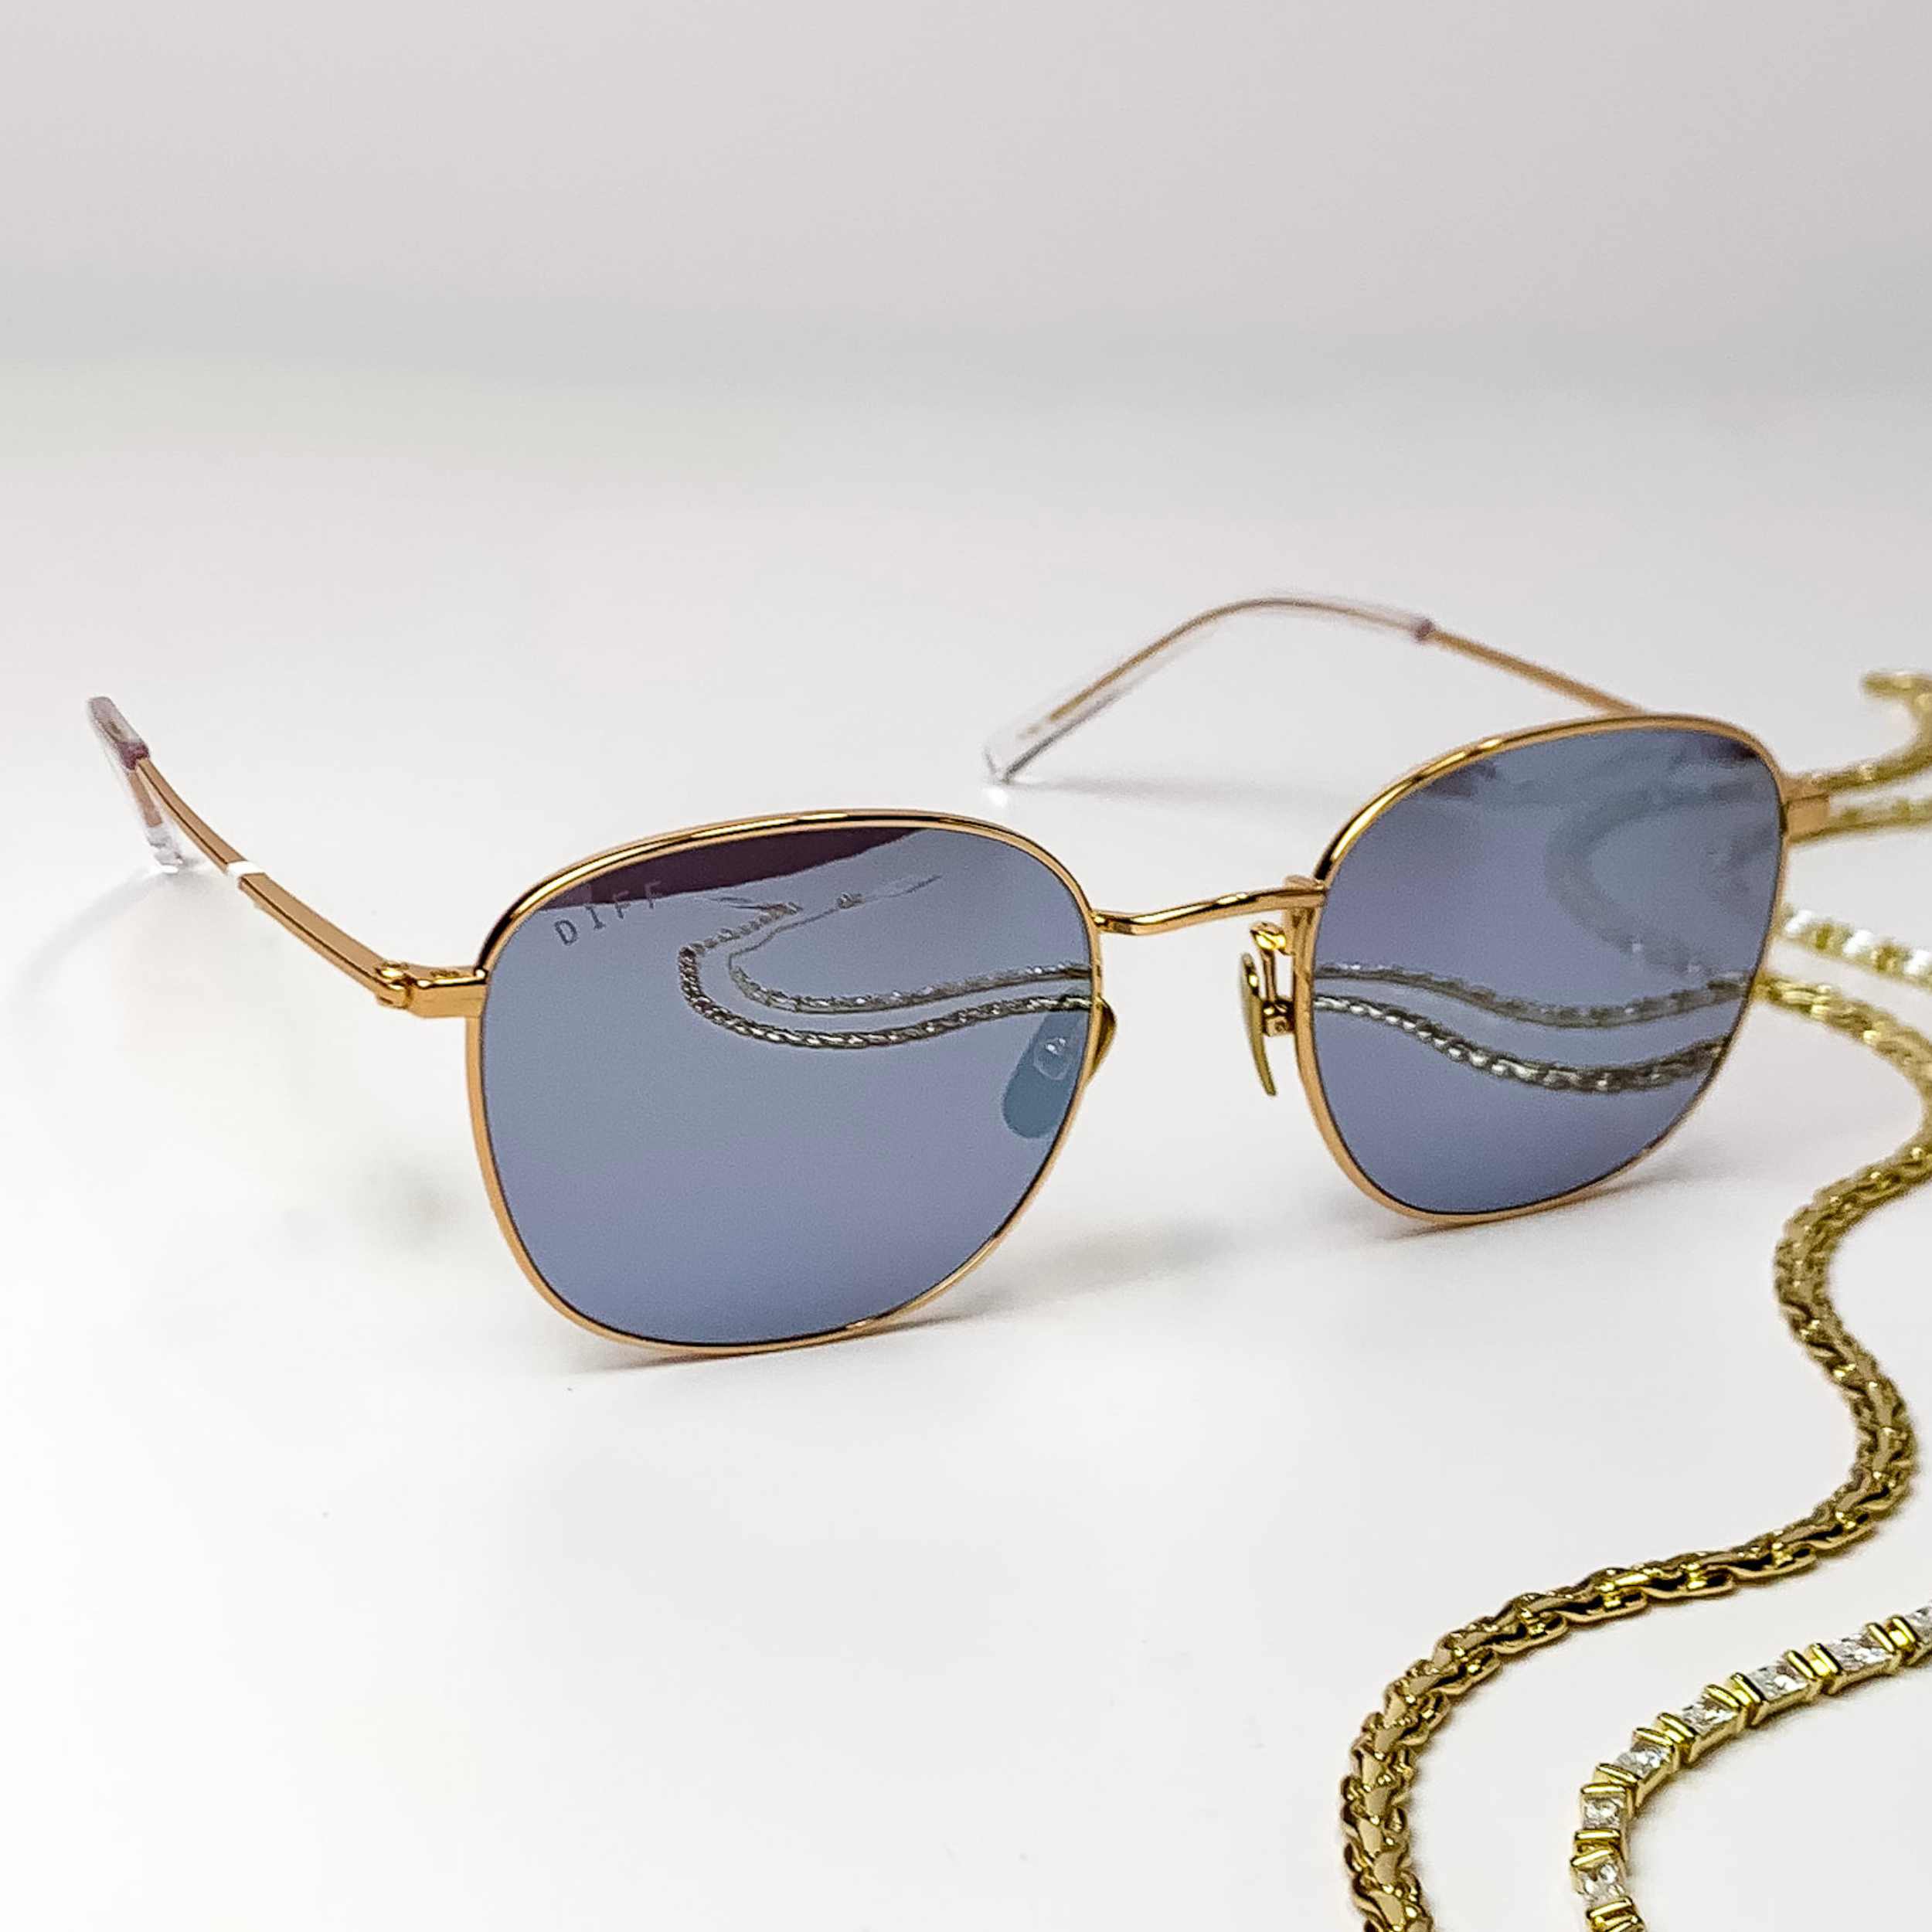 Square gold sunglasses with a thin frame, clear ear tips, and grey lenses